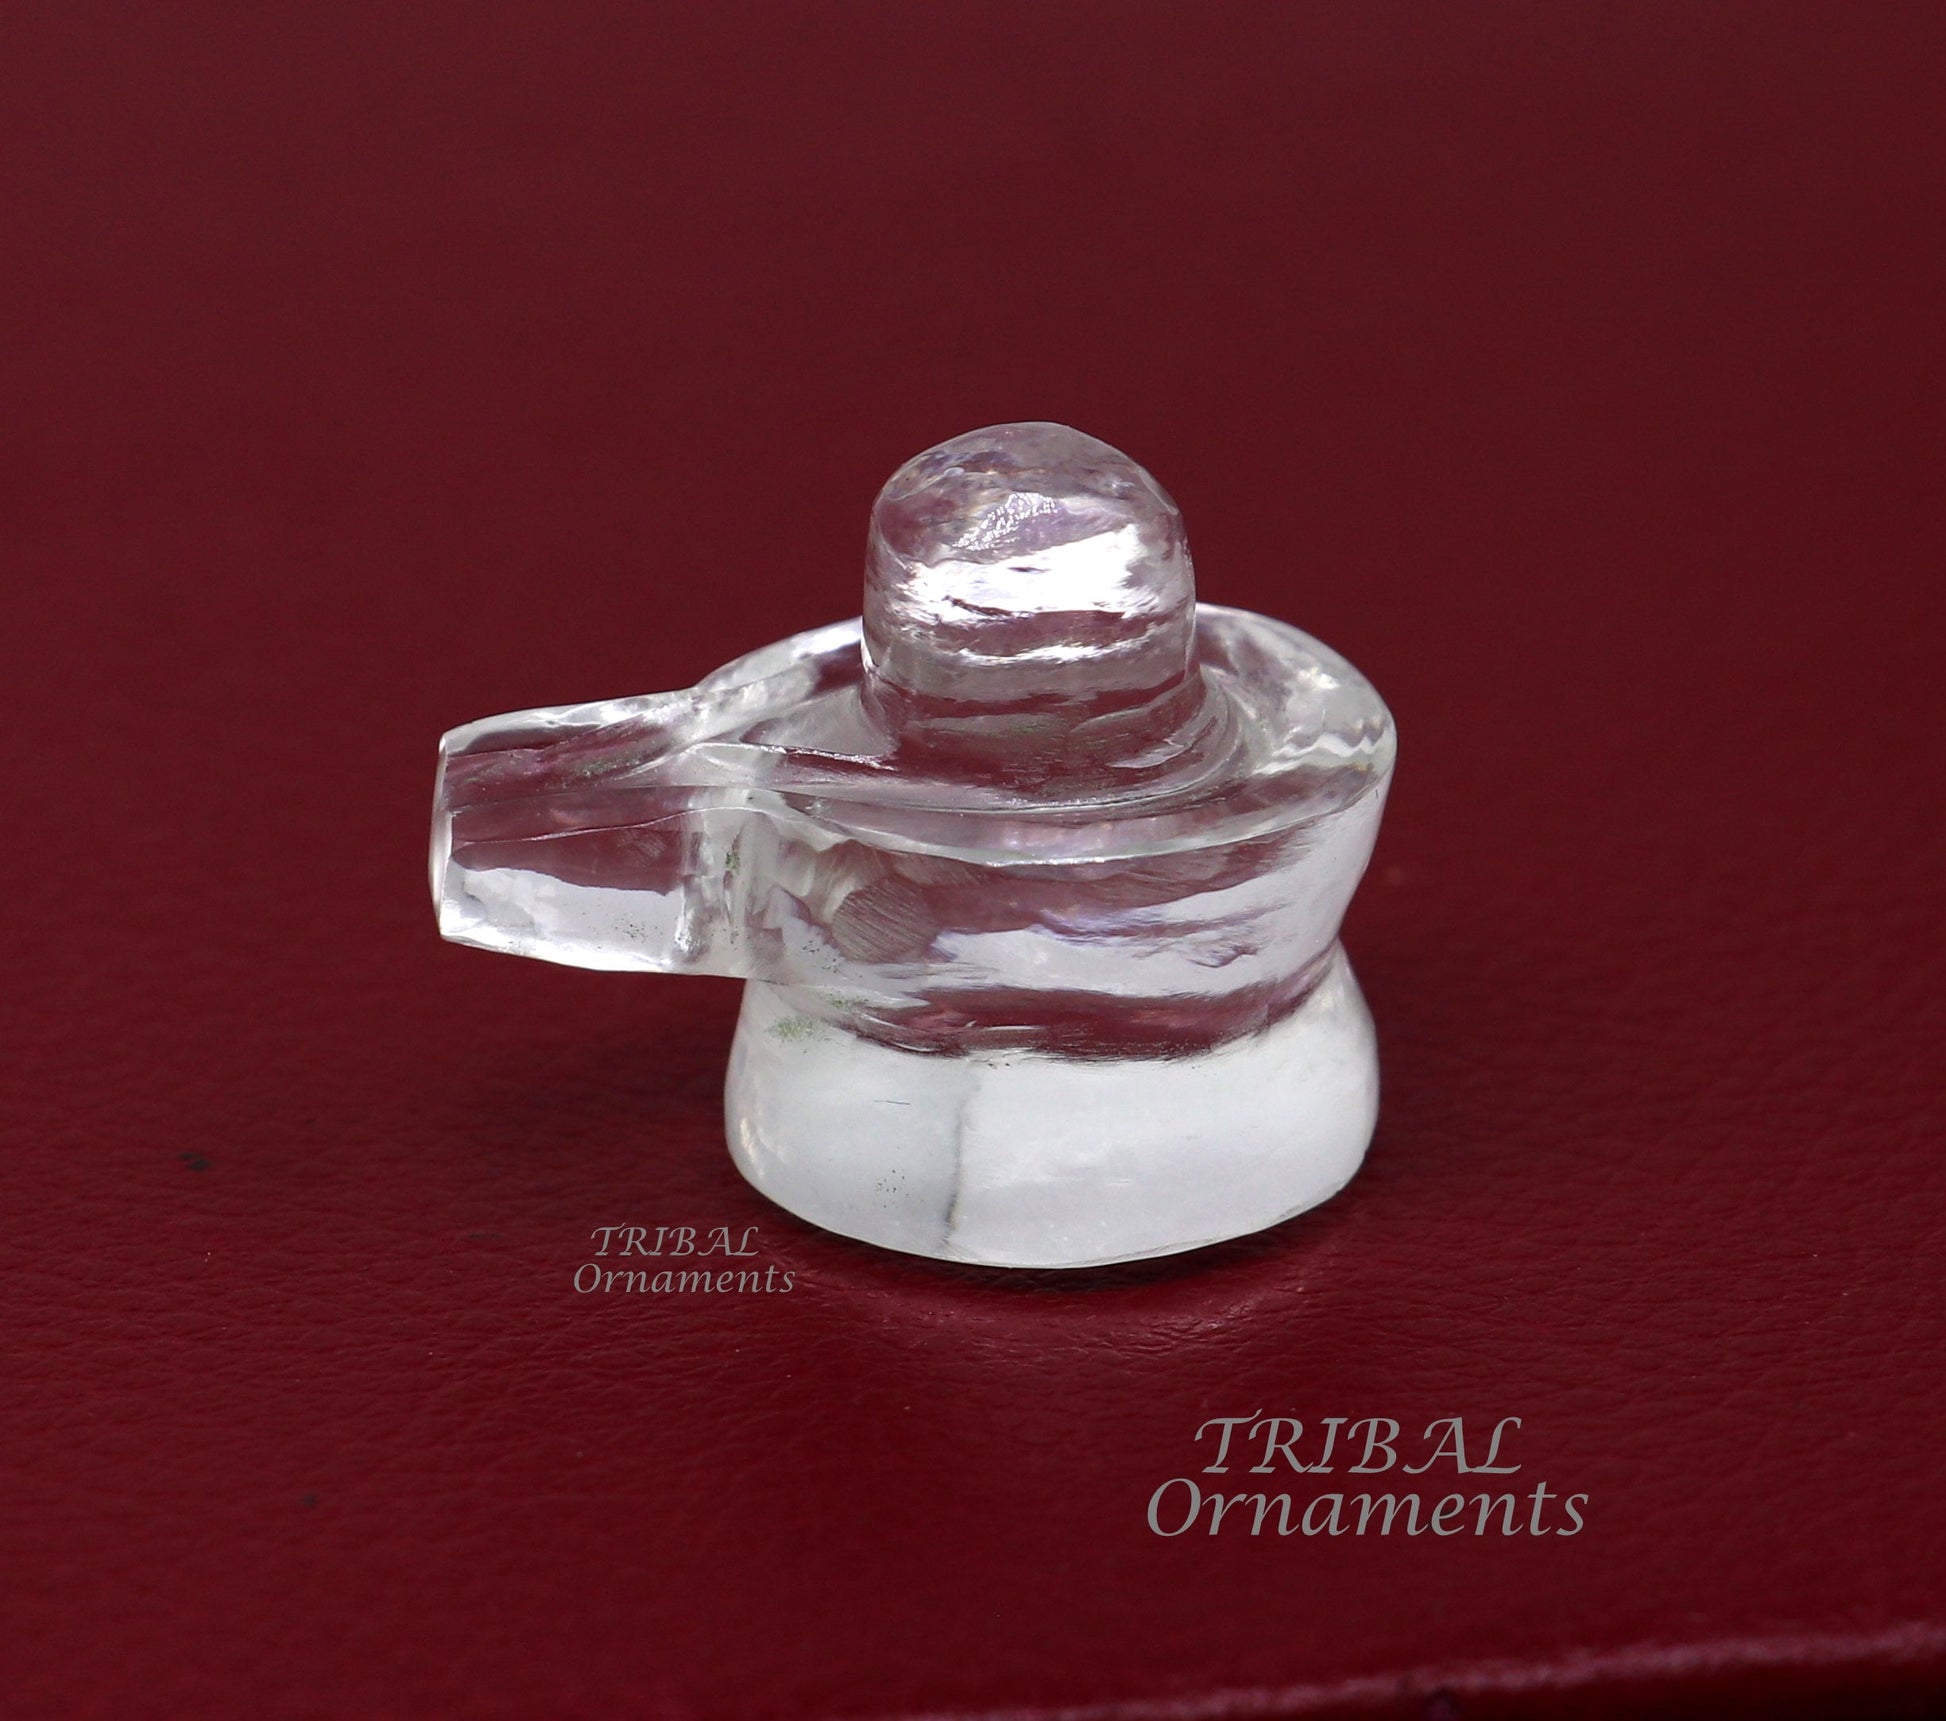 Natural sphatik crystal stone divine lor shiva lingam statue, amazing sphatik lingam puja article for wealth and prosperity stna28 - TRIBAL ORNAMENTS